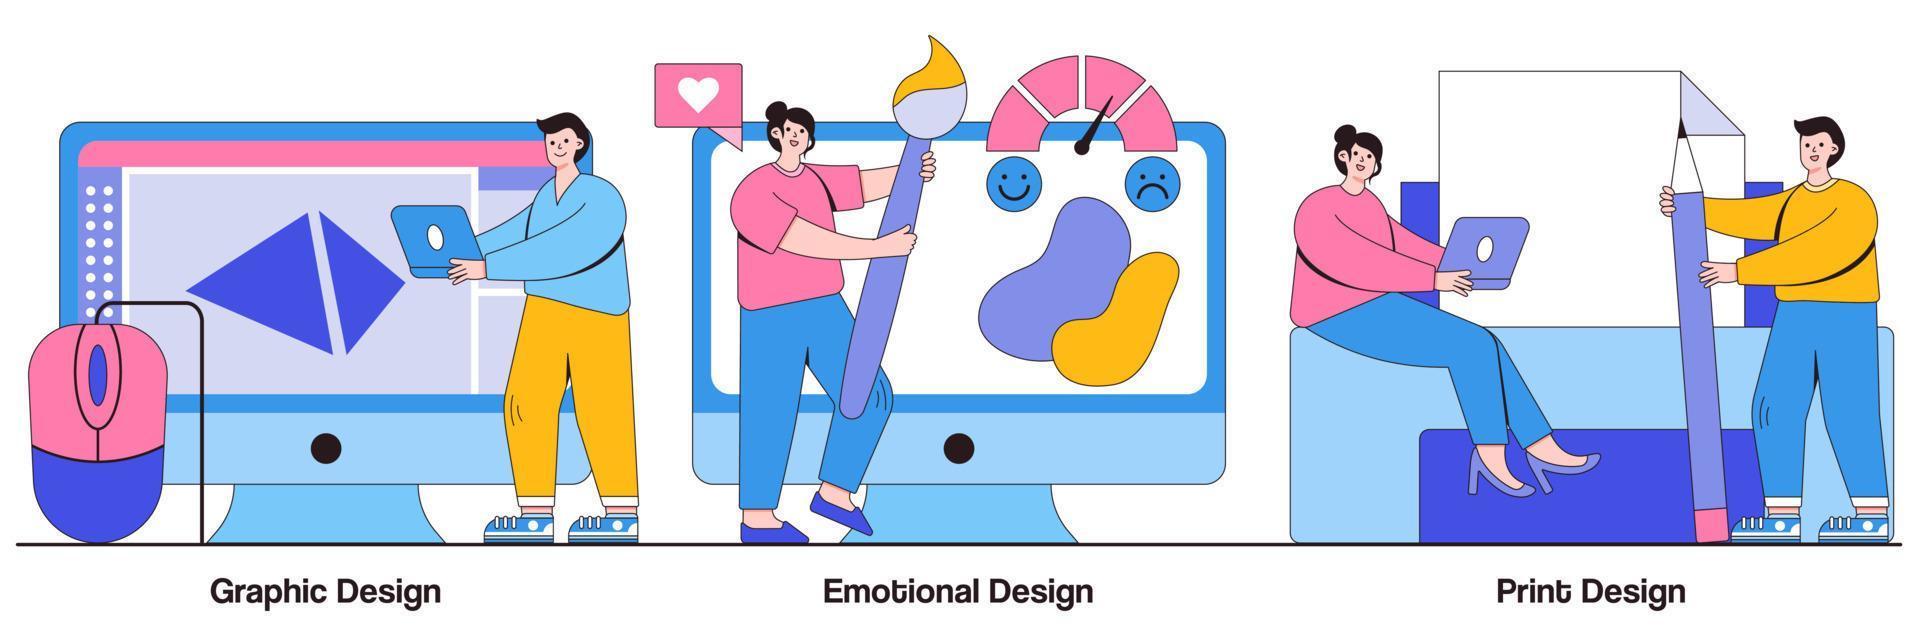 Graphic and print design, emotional engagement concept with tiny people. Design services vector illustration set. Landing web page, freelance illustrator, user experience, business card metaphor